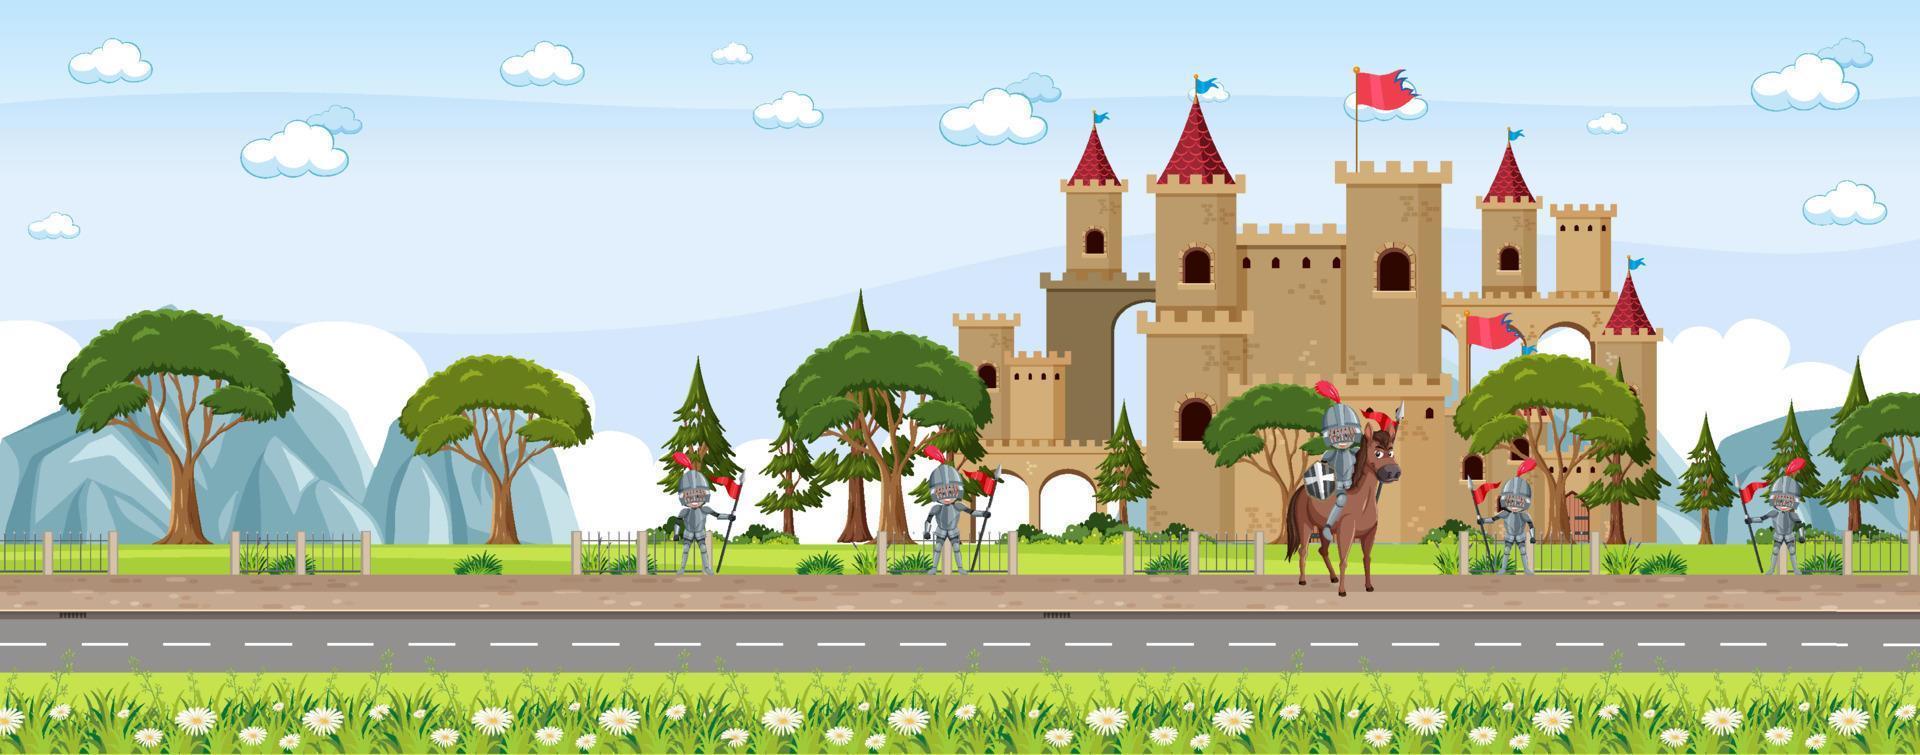 Medieval town scene with villagers and castle vector